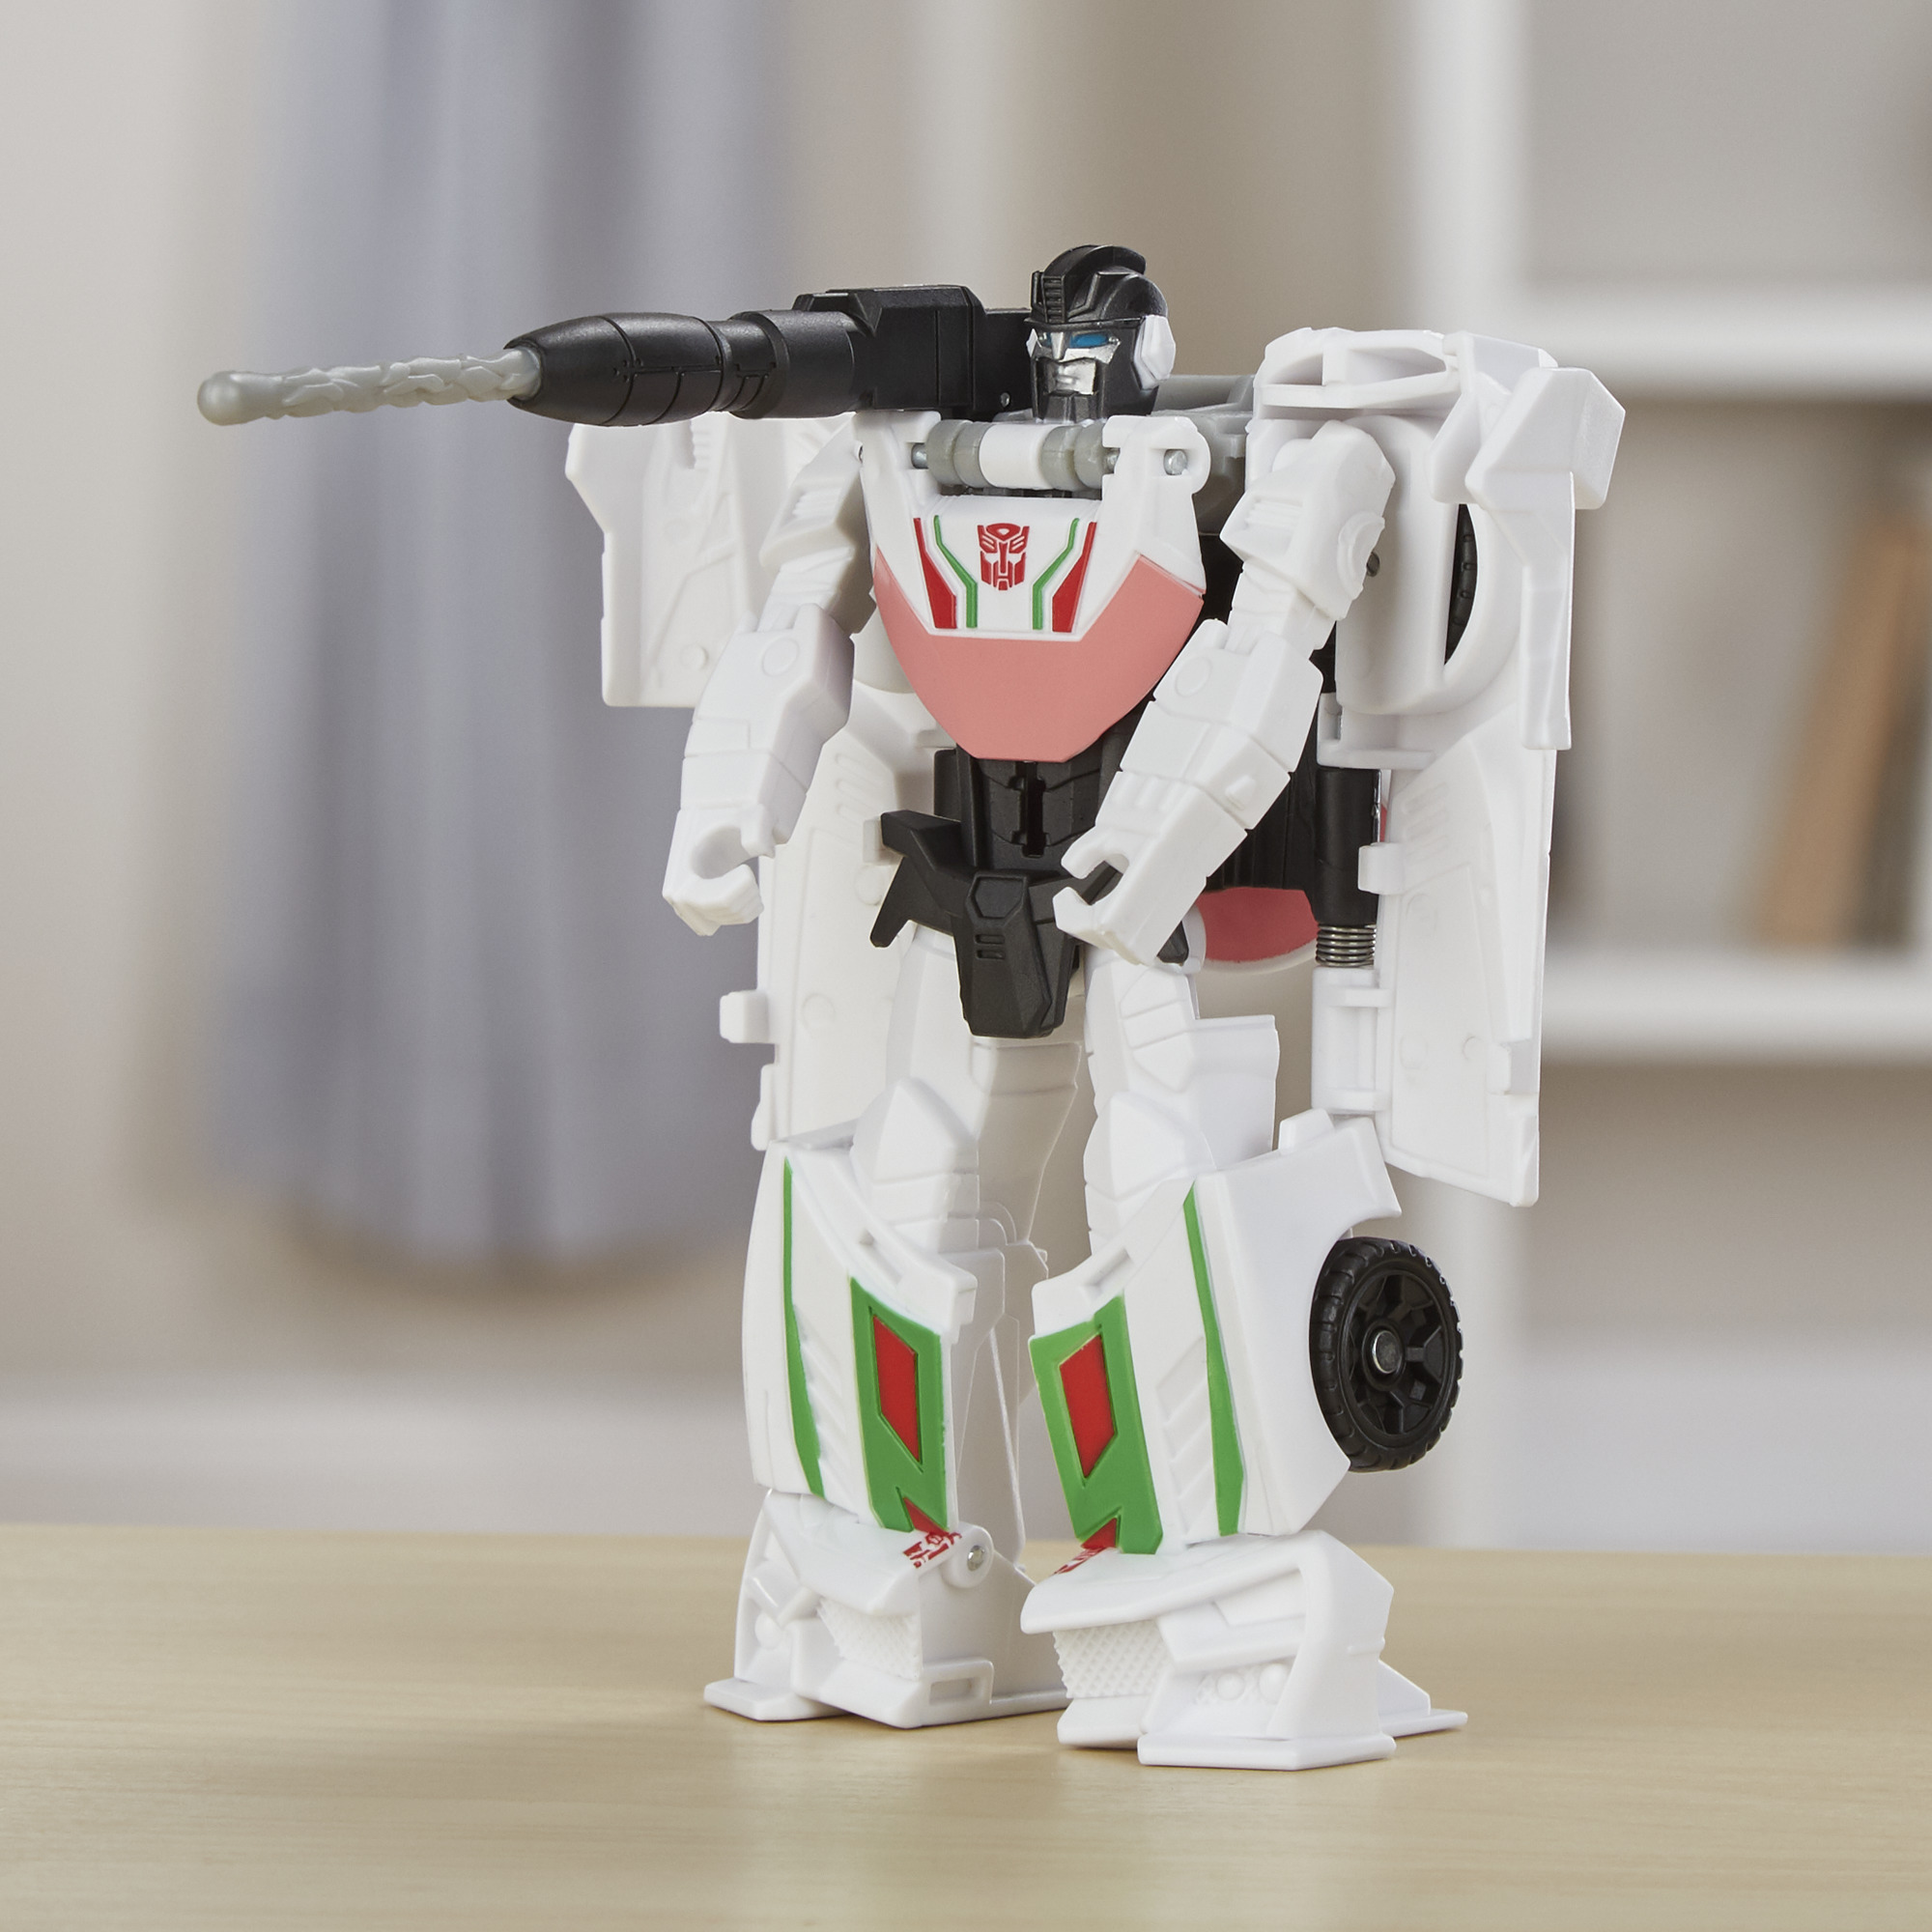 Transformers Cyberverse Action Attackers: 1-Step Changer Wheeljack Action Figure - image 4 of 5